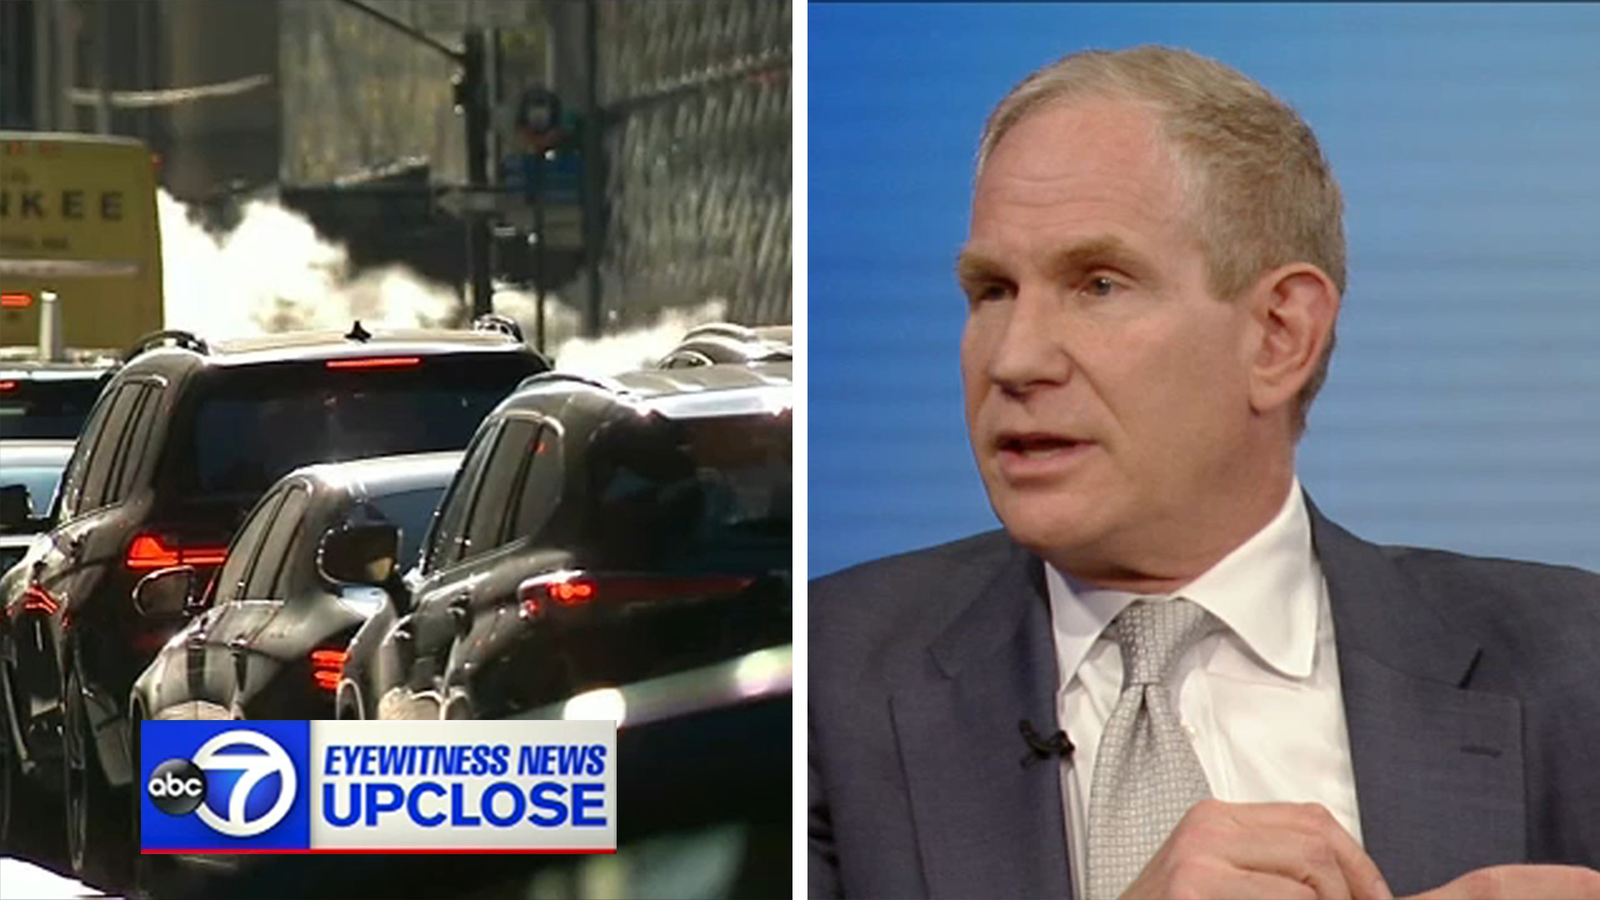 Up Close with Bill Ritter: MTA Chairman Janno Lieber defends congestion pricing, talks lawsuits attempting to block it [Video]